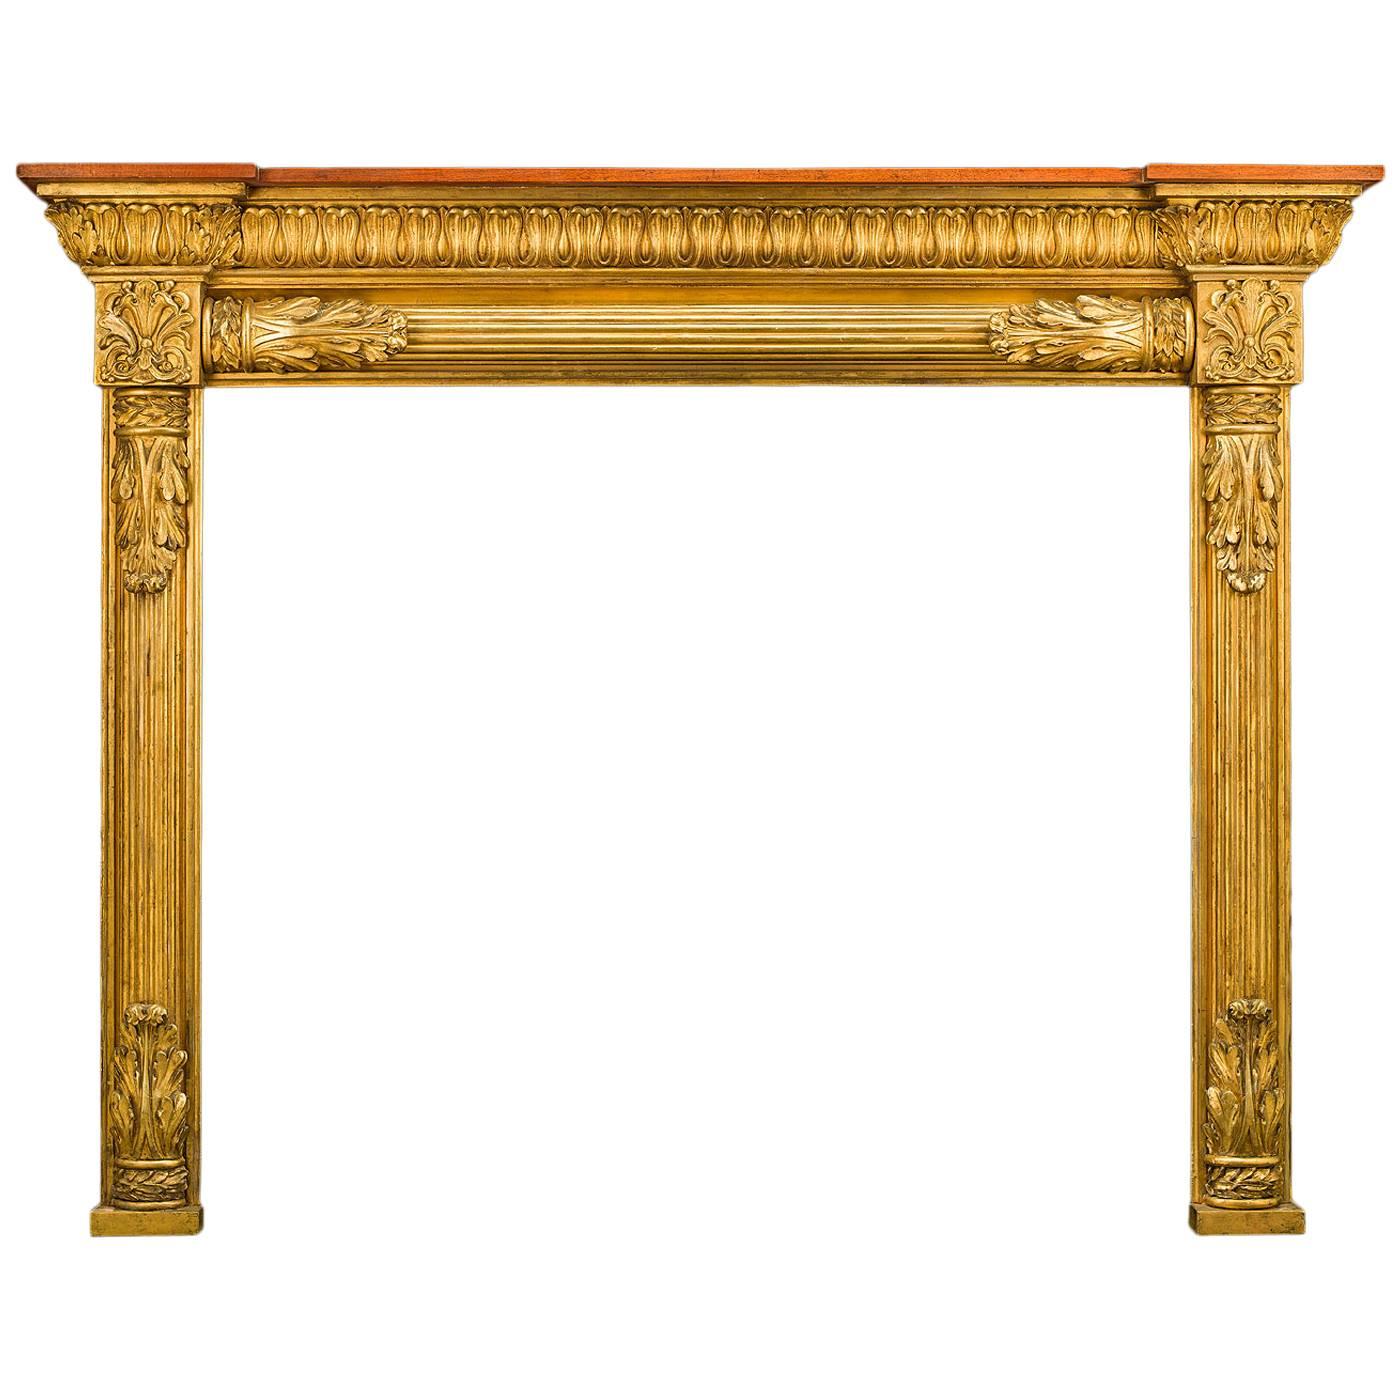 English Regency Pine and Composition, Antique Giltwood Fireplace Mantel